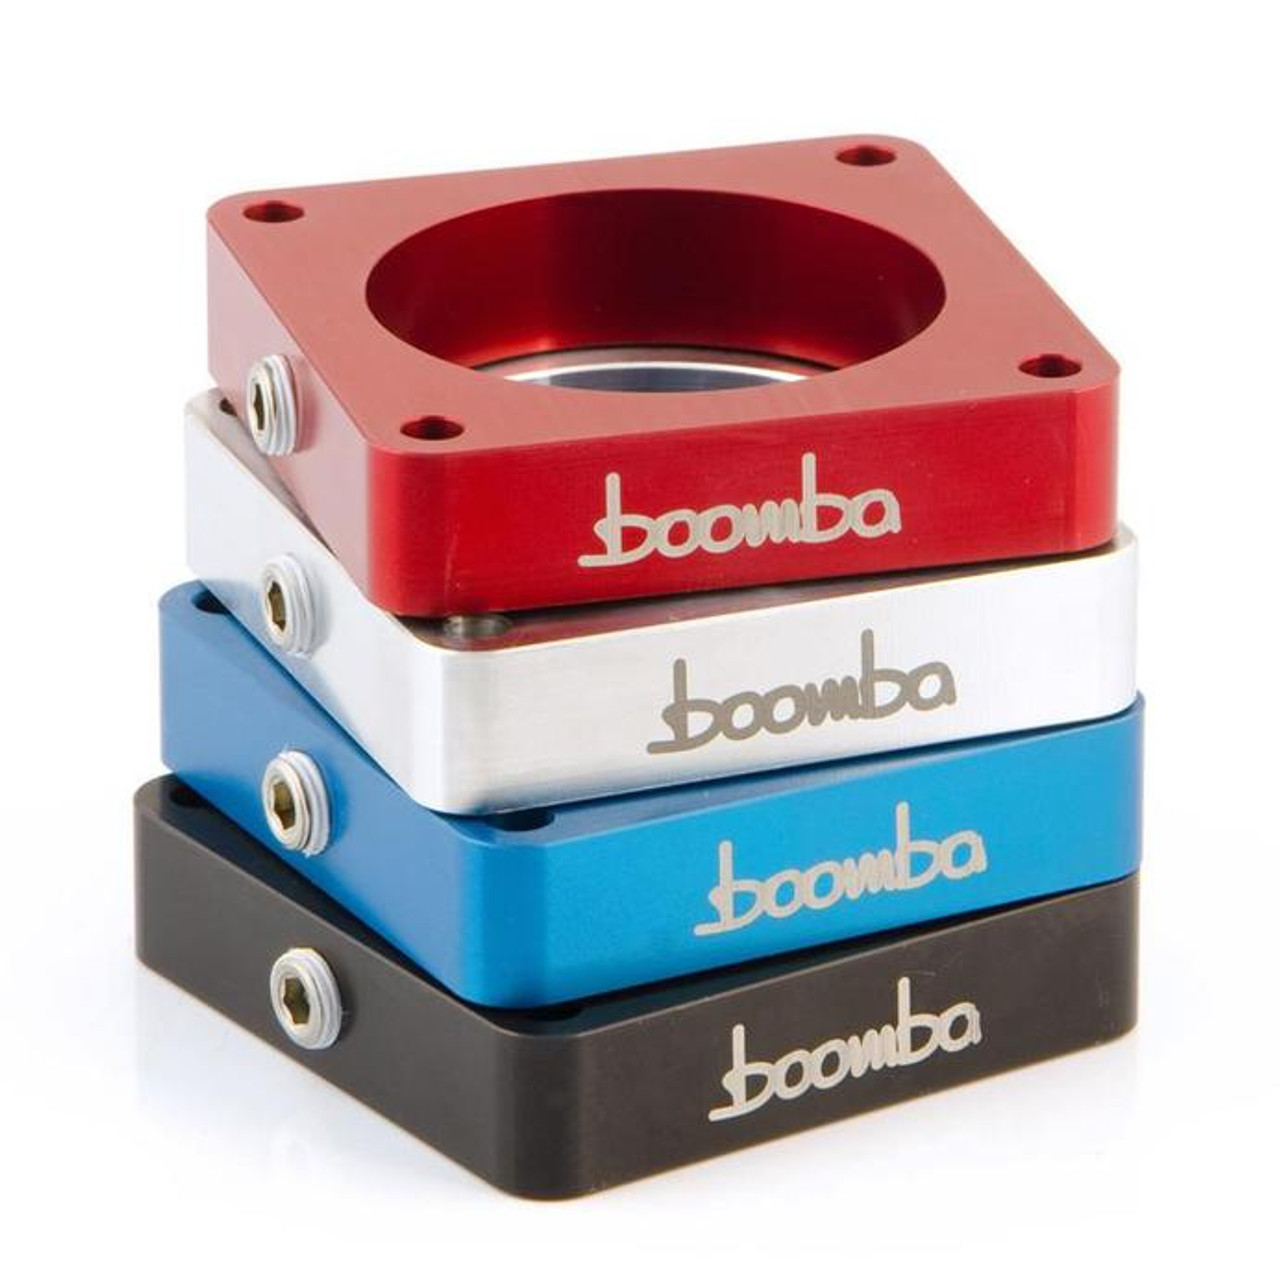 Boomba Racing Throttle Body Spacer | 2013-2018 Ford Focus ST, 2016-2018 Ford Focus RS, and 2013-2020 Ford Fusion